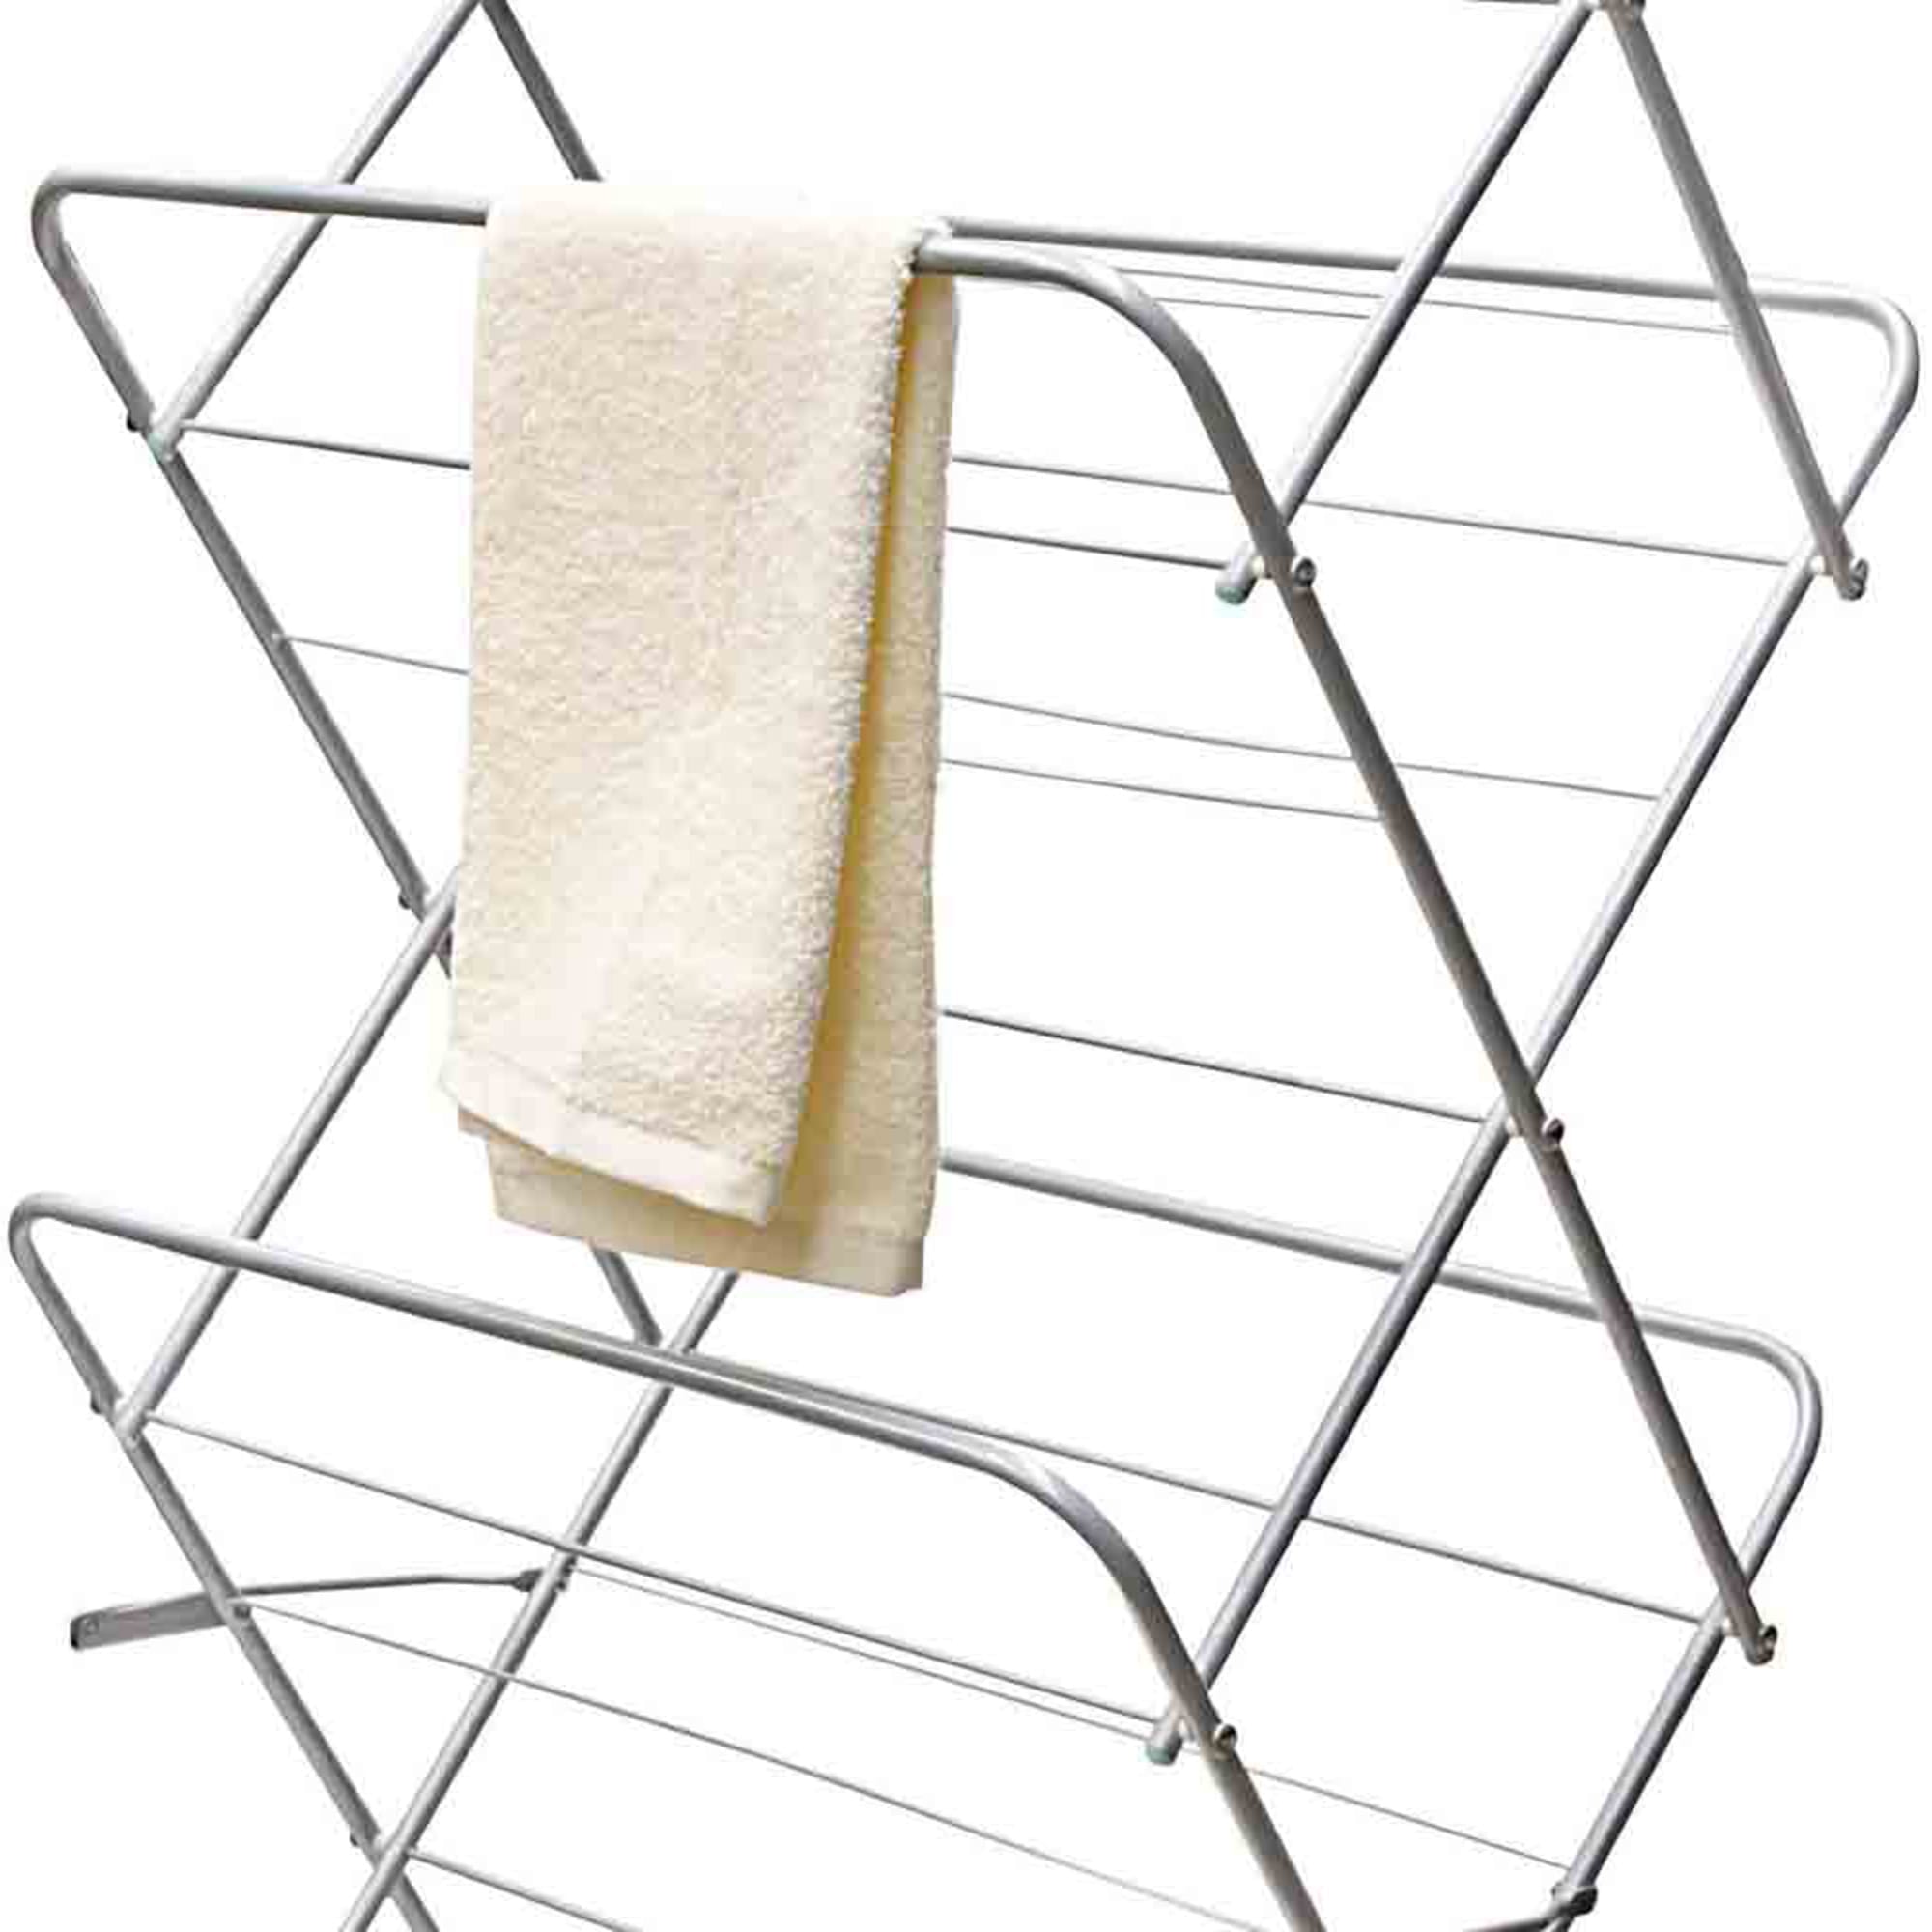 Home Basics 3-Tier Clothes Dryer $25.00 EACH, CASE PACK OF 4